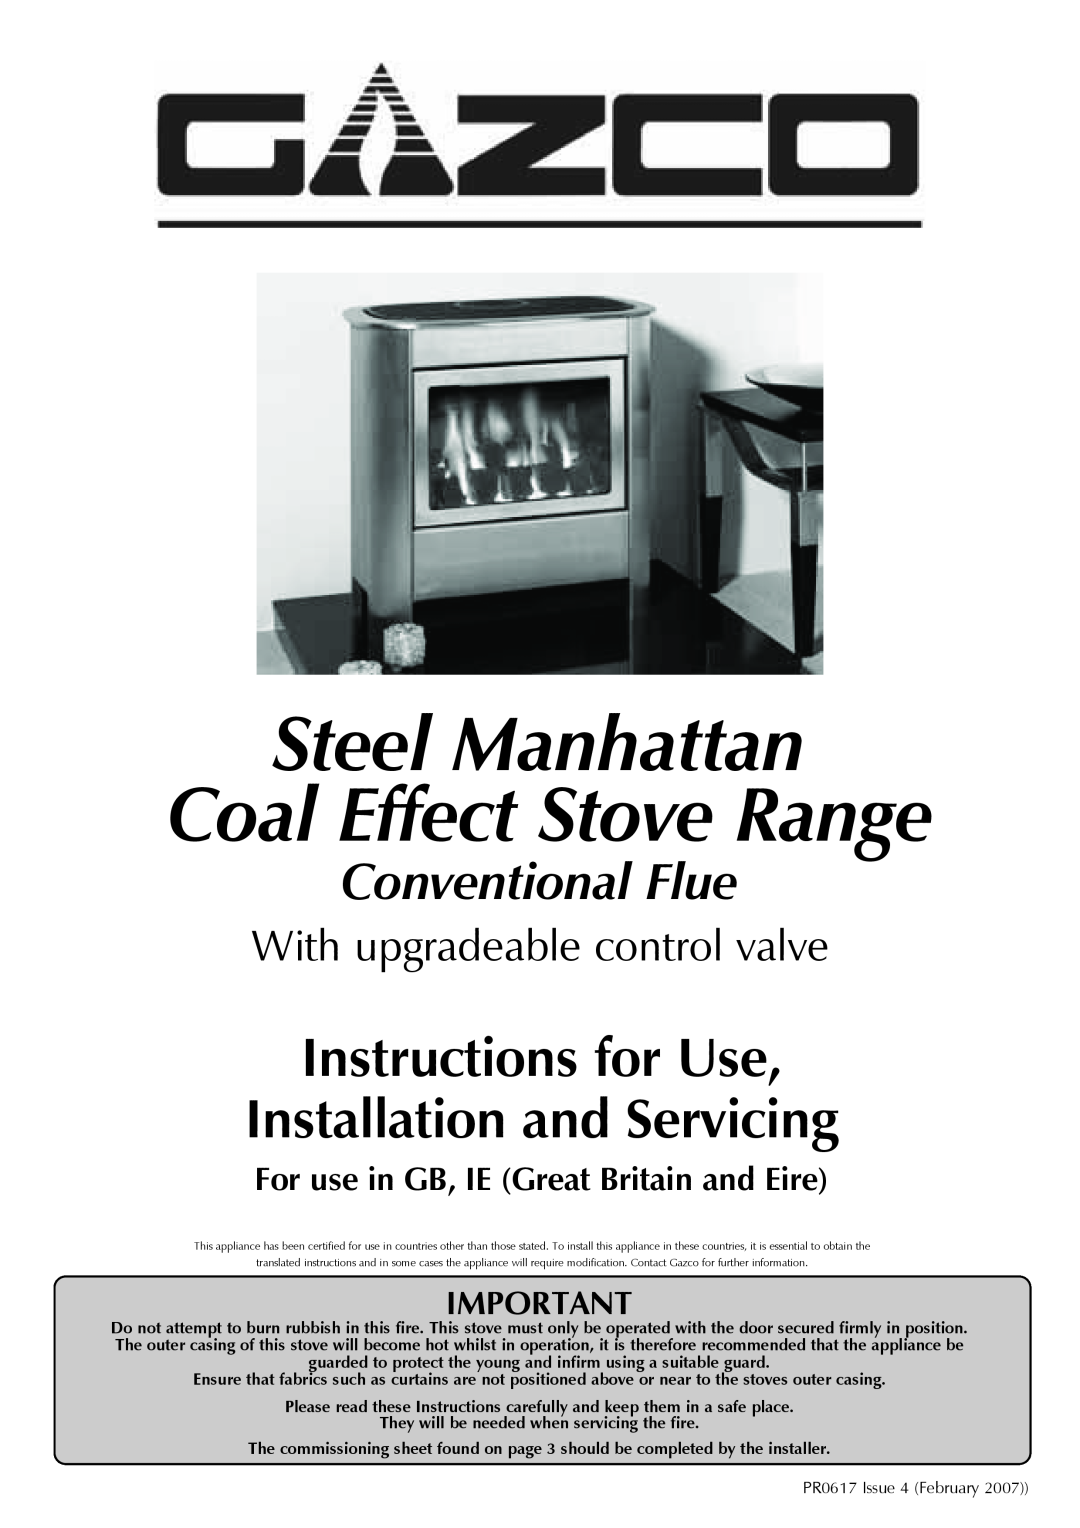 Stovax AR0366, AR0367 manual Steel Manhattan Coal Effect Stove Range, Instructions for Use Installation and Servicing 